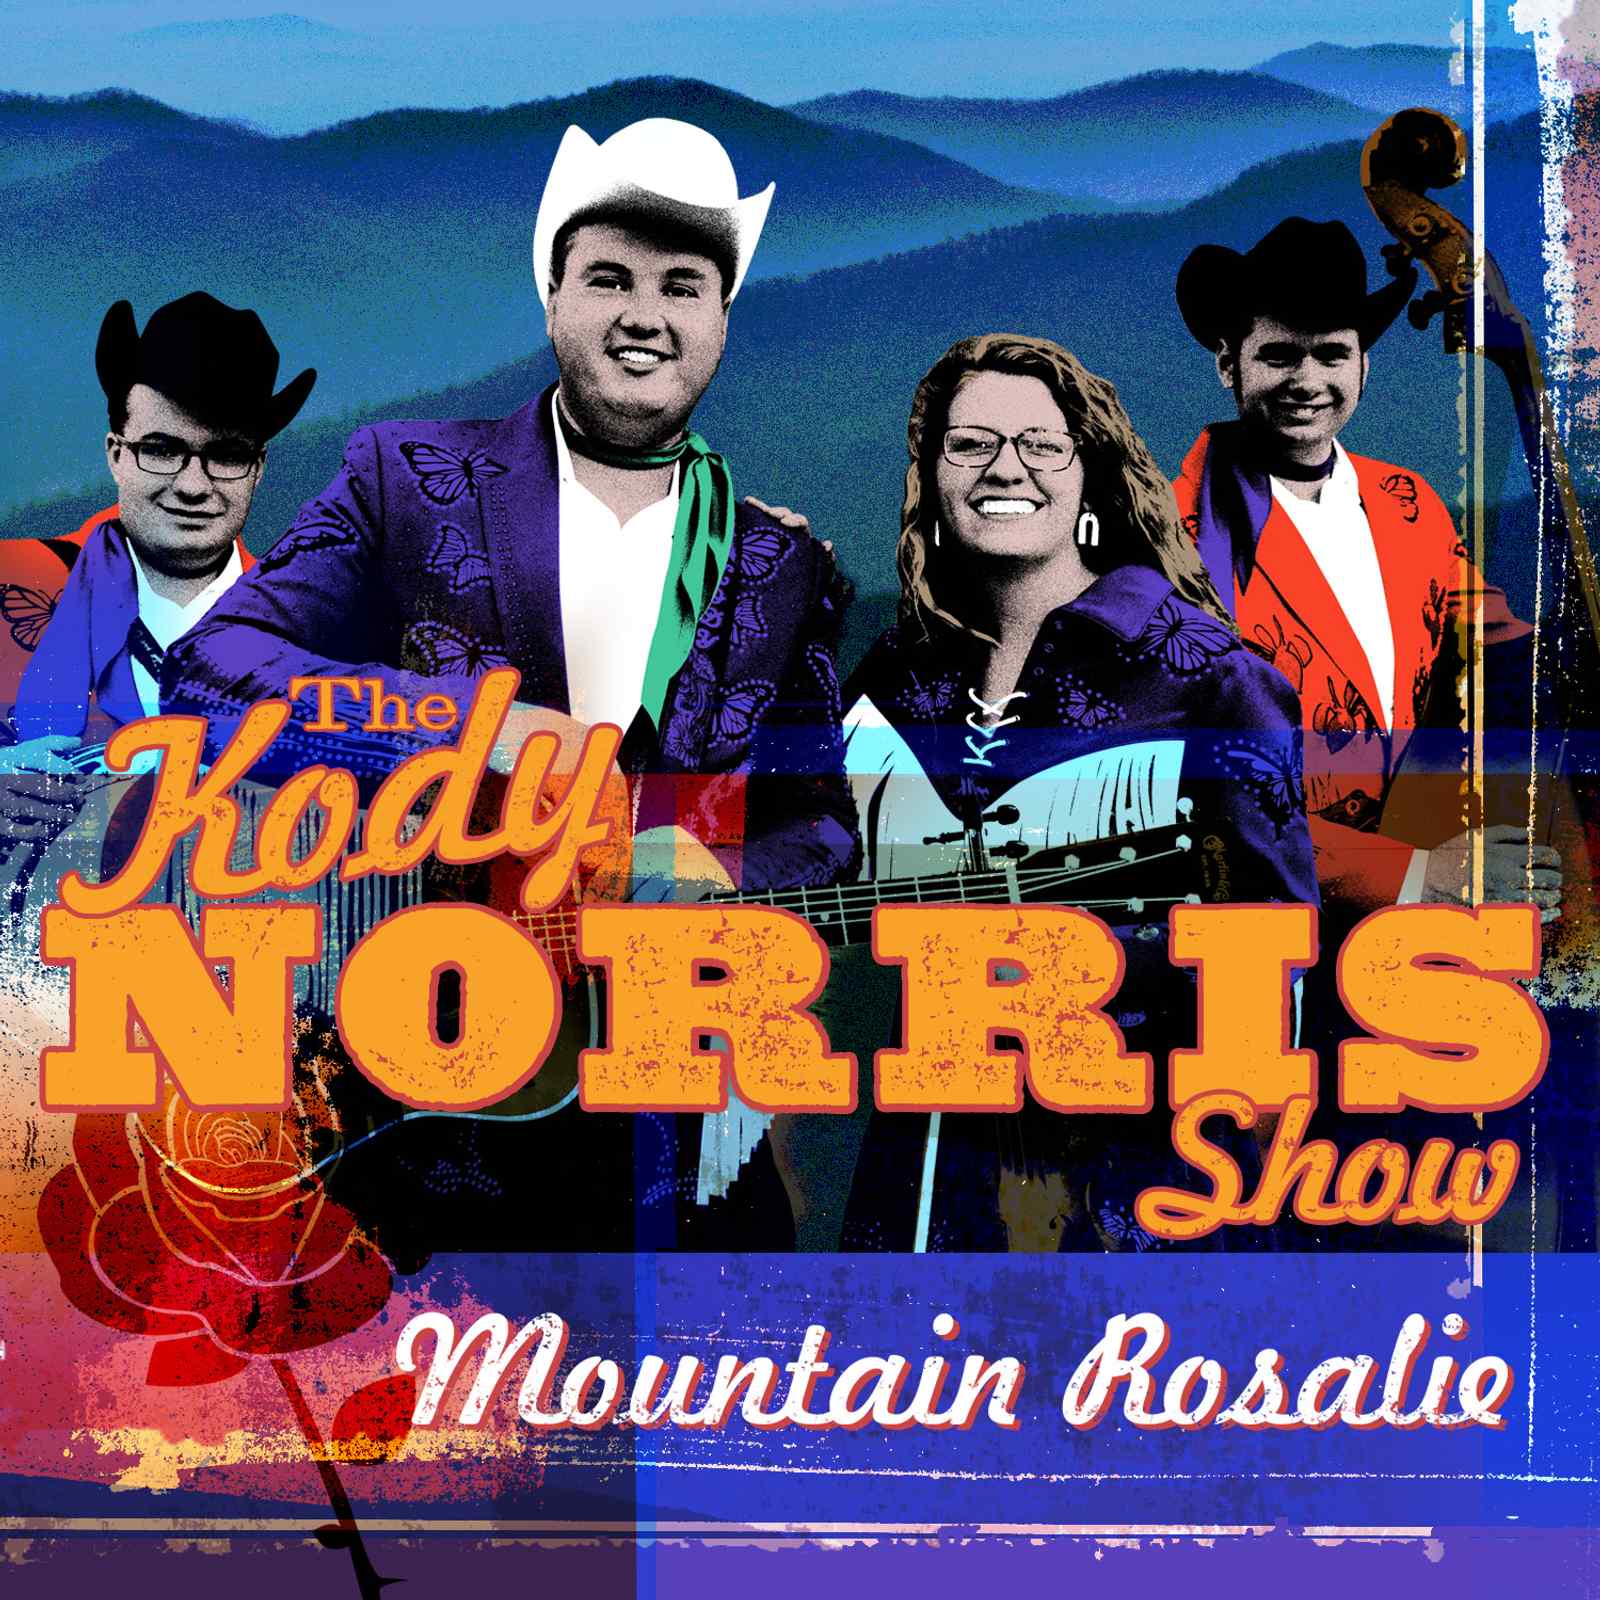 THE KODY NORRIS SHOW RELEASES NEW LYRIC VIDEO FOR "MOUNTAIN ROSALIE"